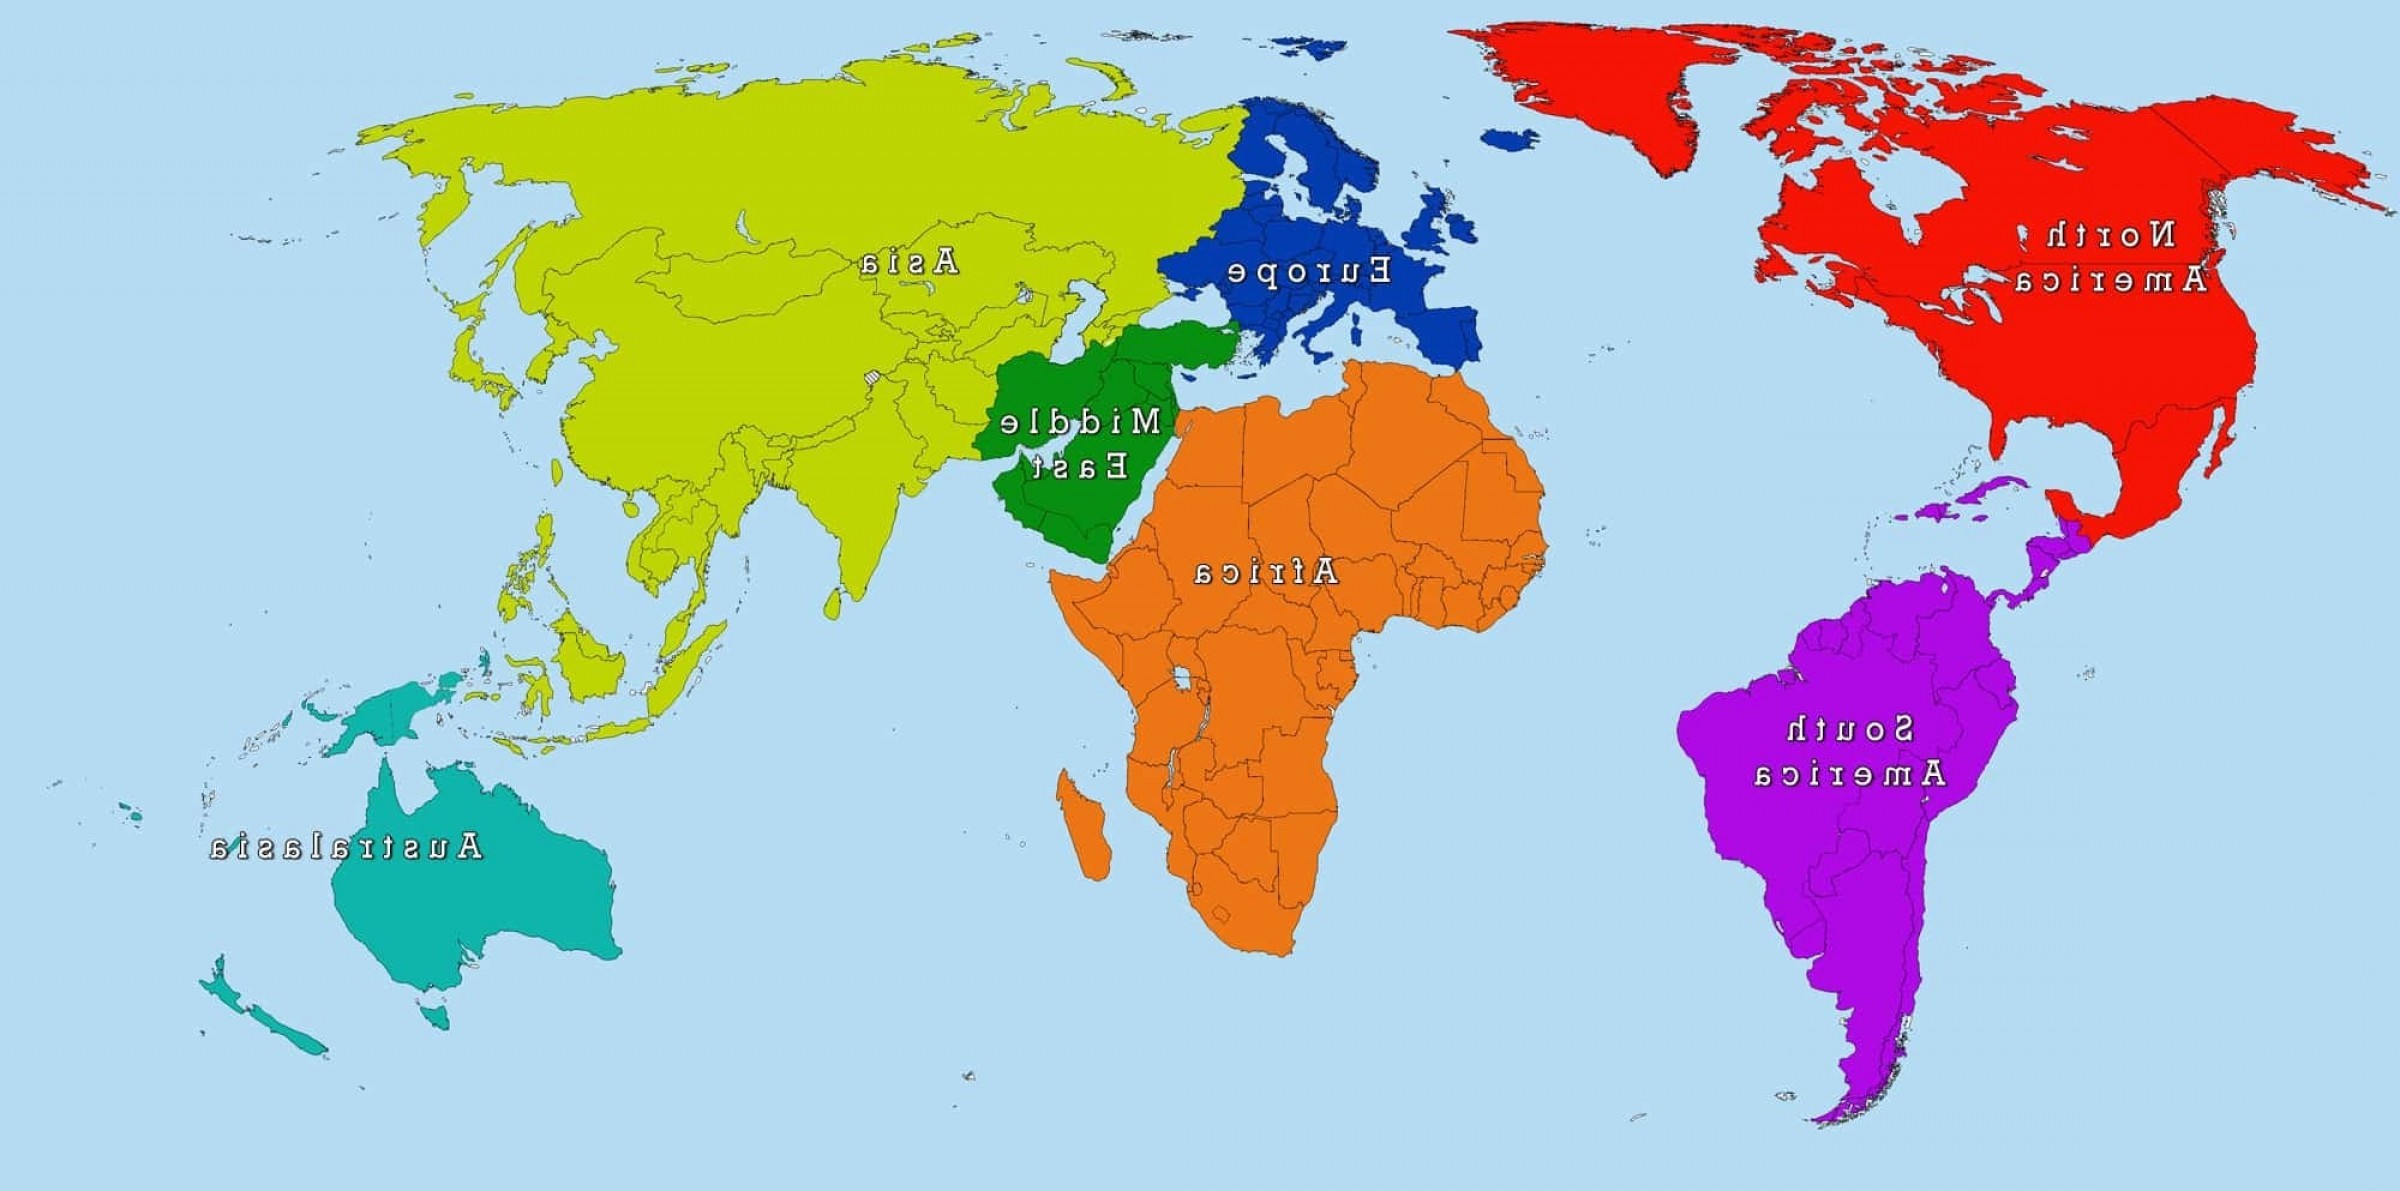 Map Of The World With Labeled Continents - United States Map